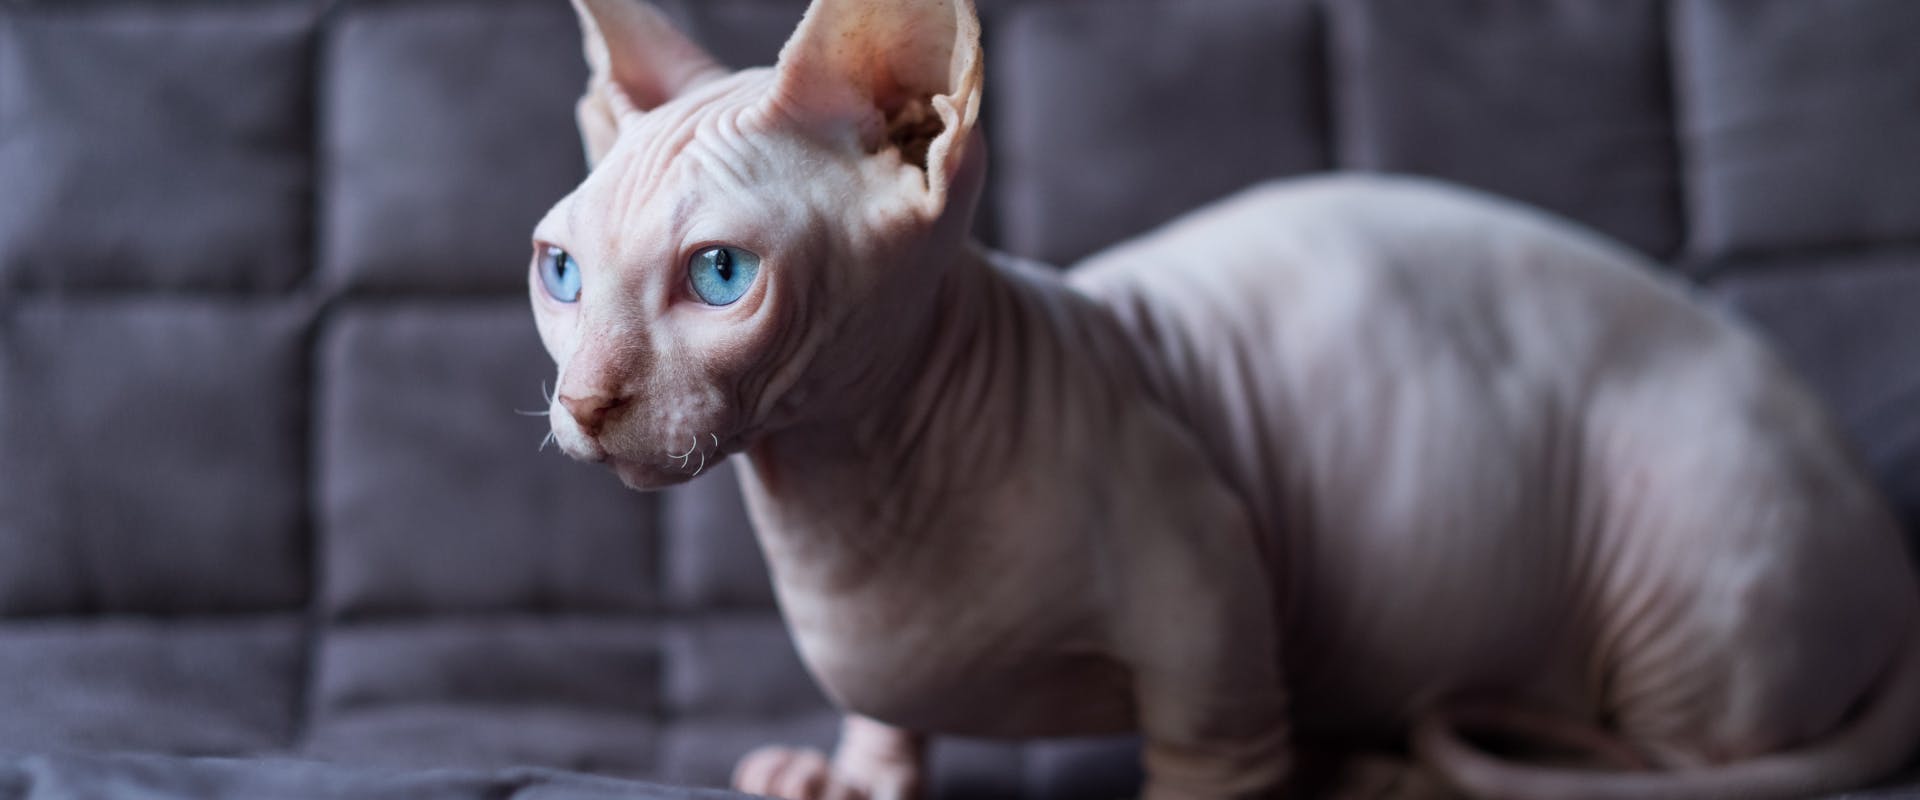 a hairless munchkin cat breed sitting on a black couch